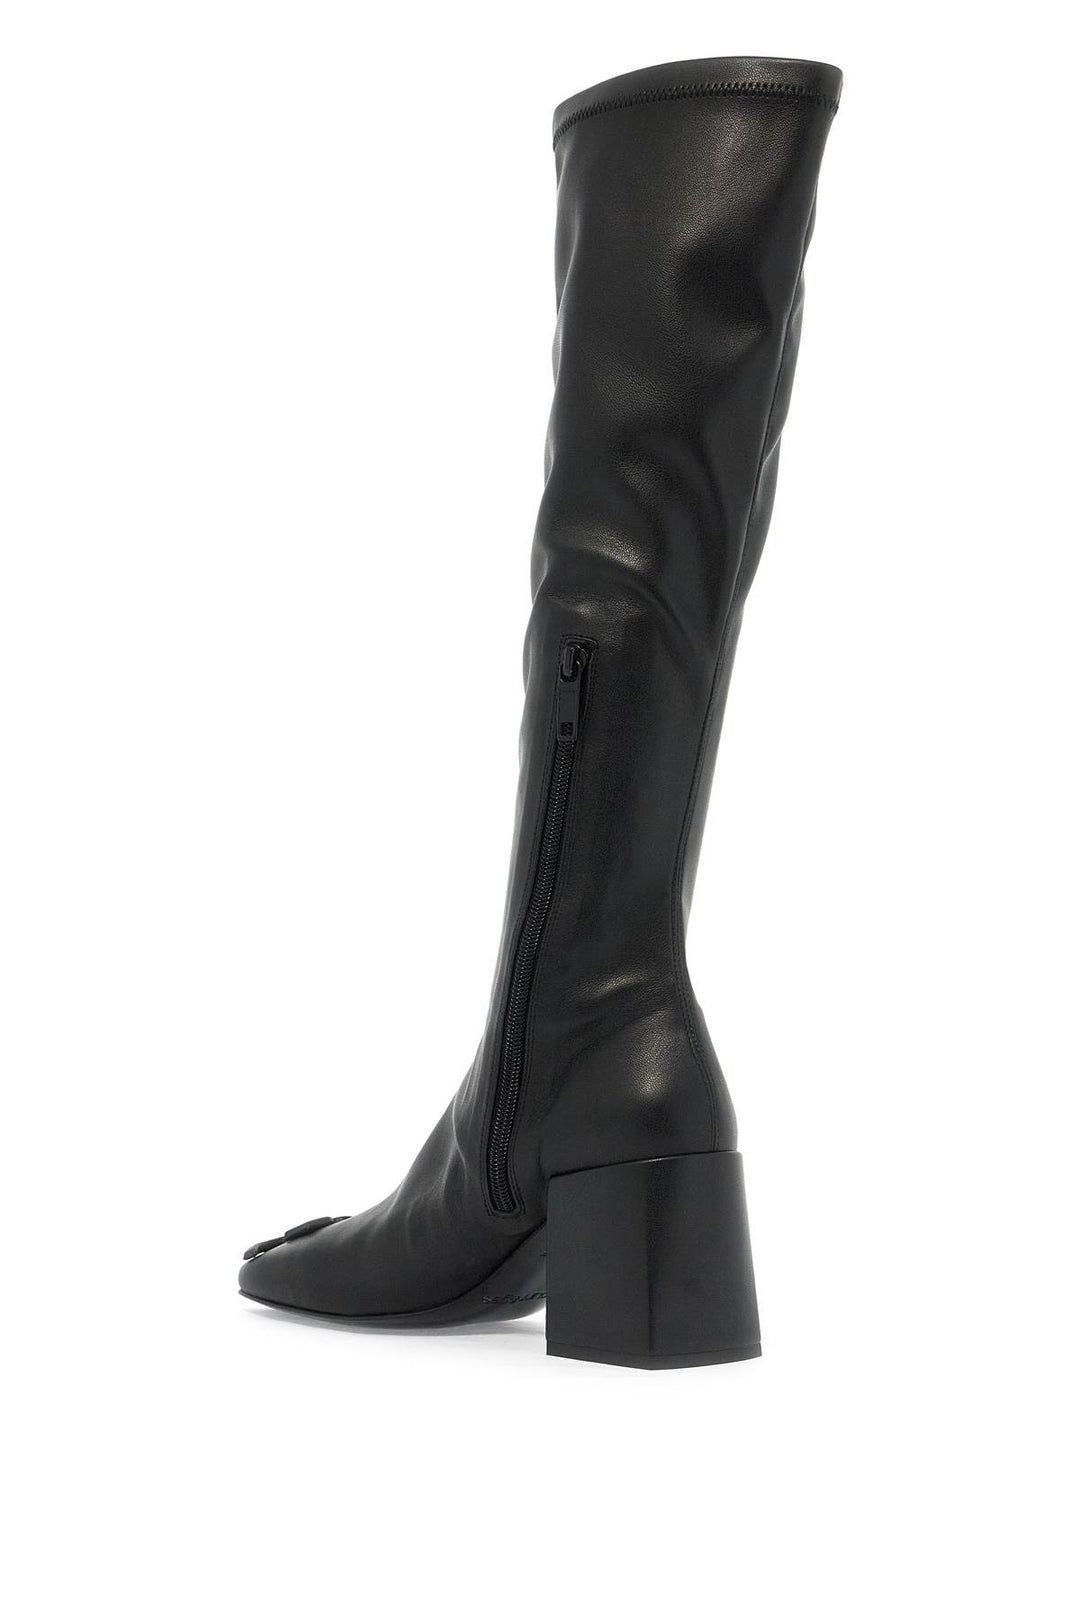 Courreges Stretch Reedition Boots In Faux Leather   Black